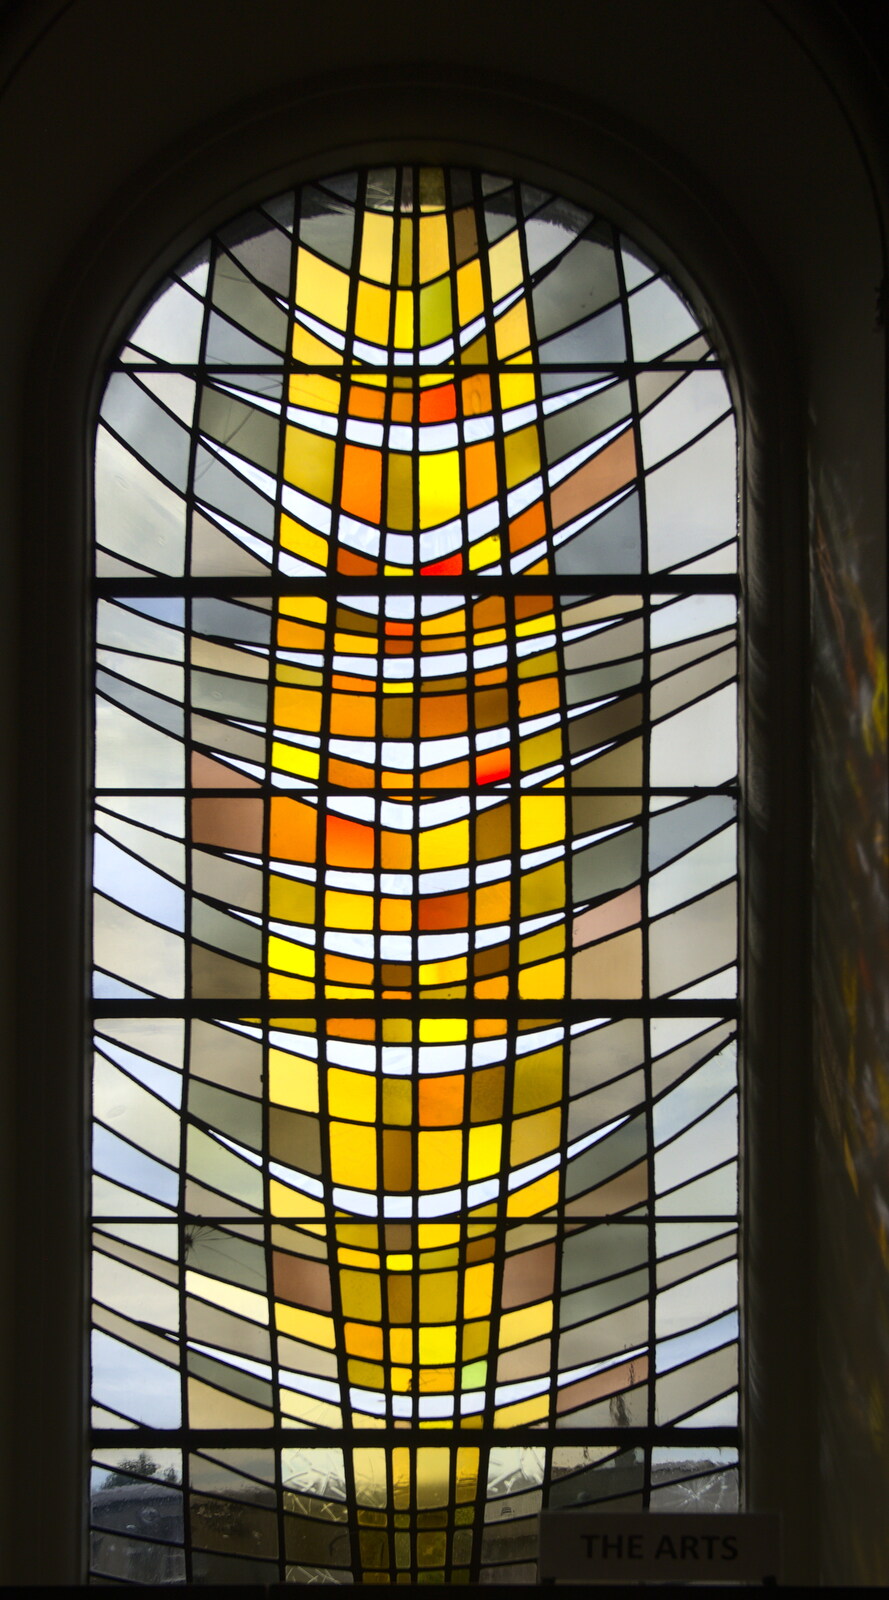 Modern stained glass from Sion Hill and Blackrock for the Day, Dublin, Ireland - 17th September 2016